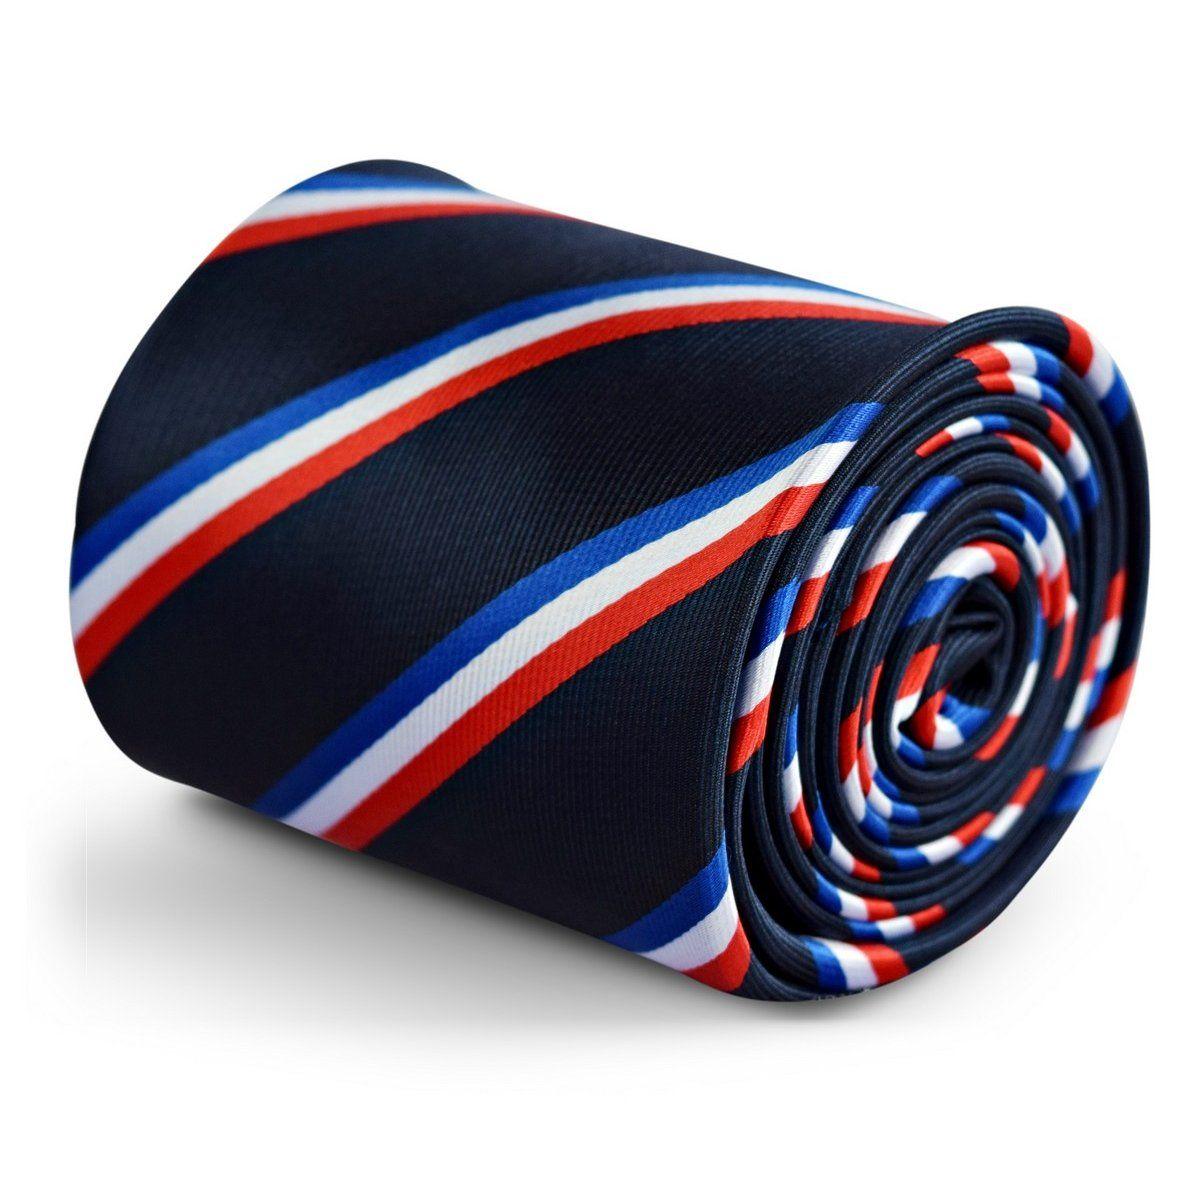 Red and Blue Striped Logo - navy tie with French flag red white and blue design